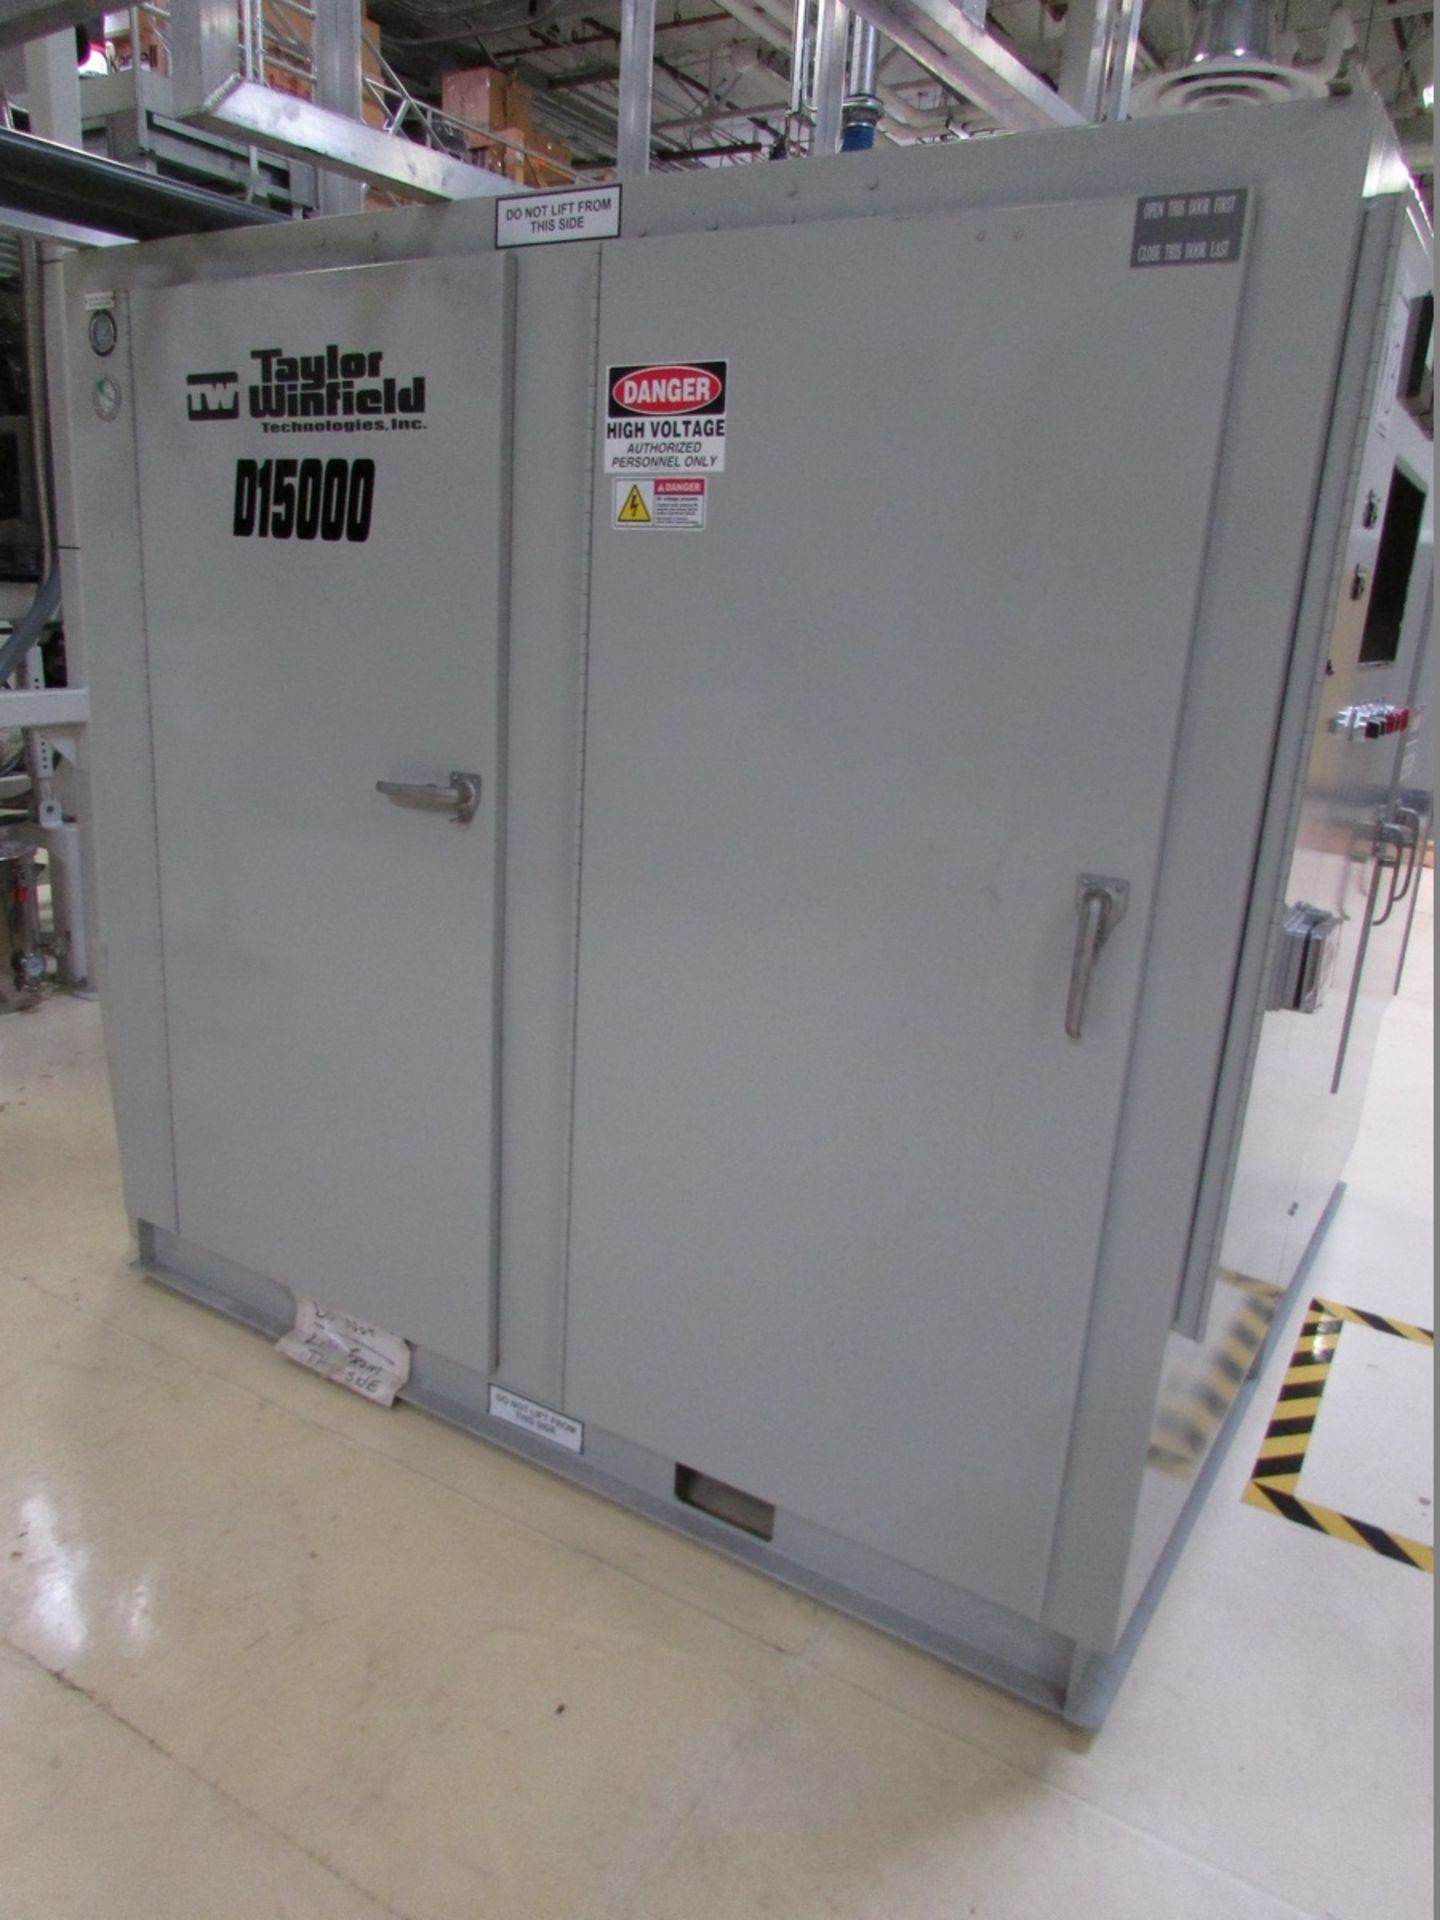 Taylor Winfield Technologies D15000 Induction Generator 480V 470A 390KVA 60Hz 3PH Input, 150KW 3- - Image 3 of 28